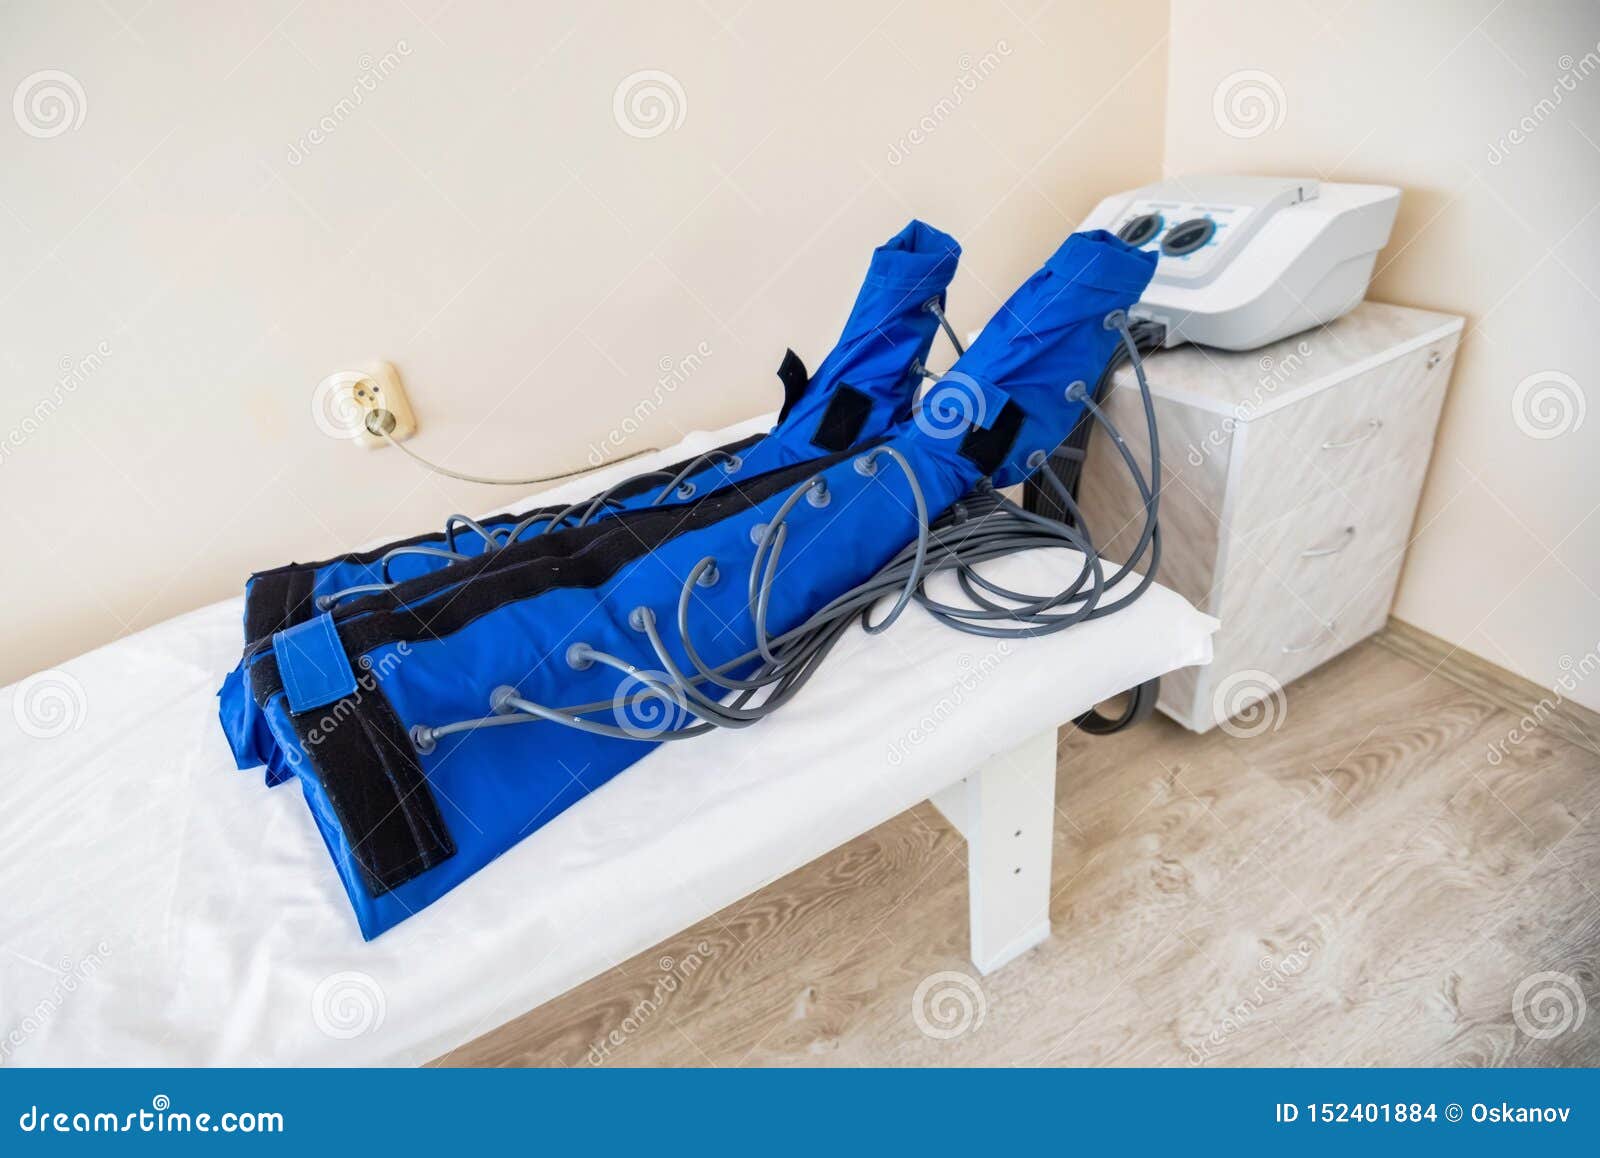 https://thumbs.dreamstime.com/z/intermittent-pneumatic-compression-equipment-medical-room-view-couch-cabinet-152401884.jpg